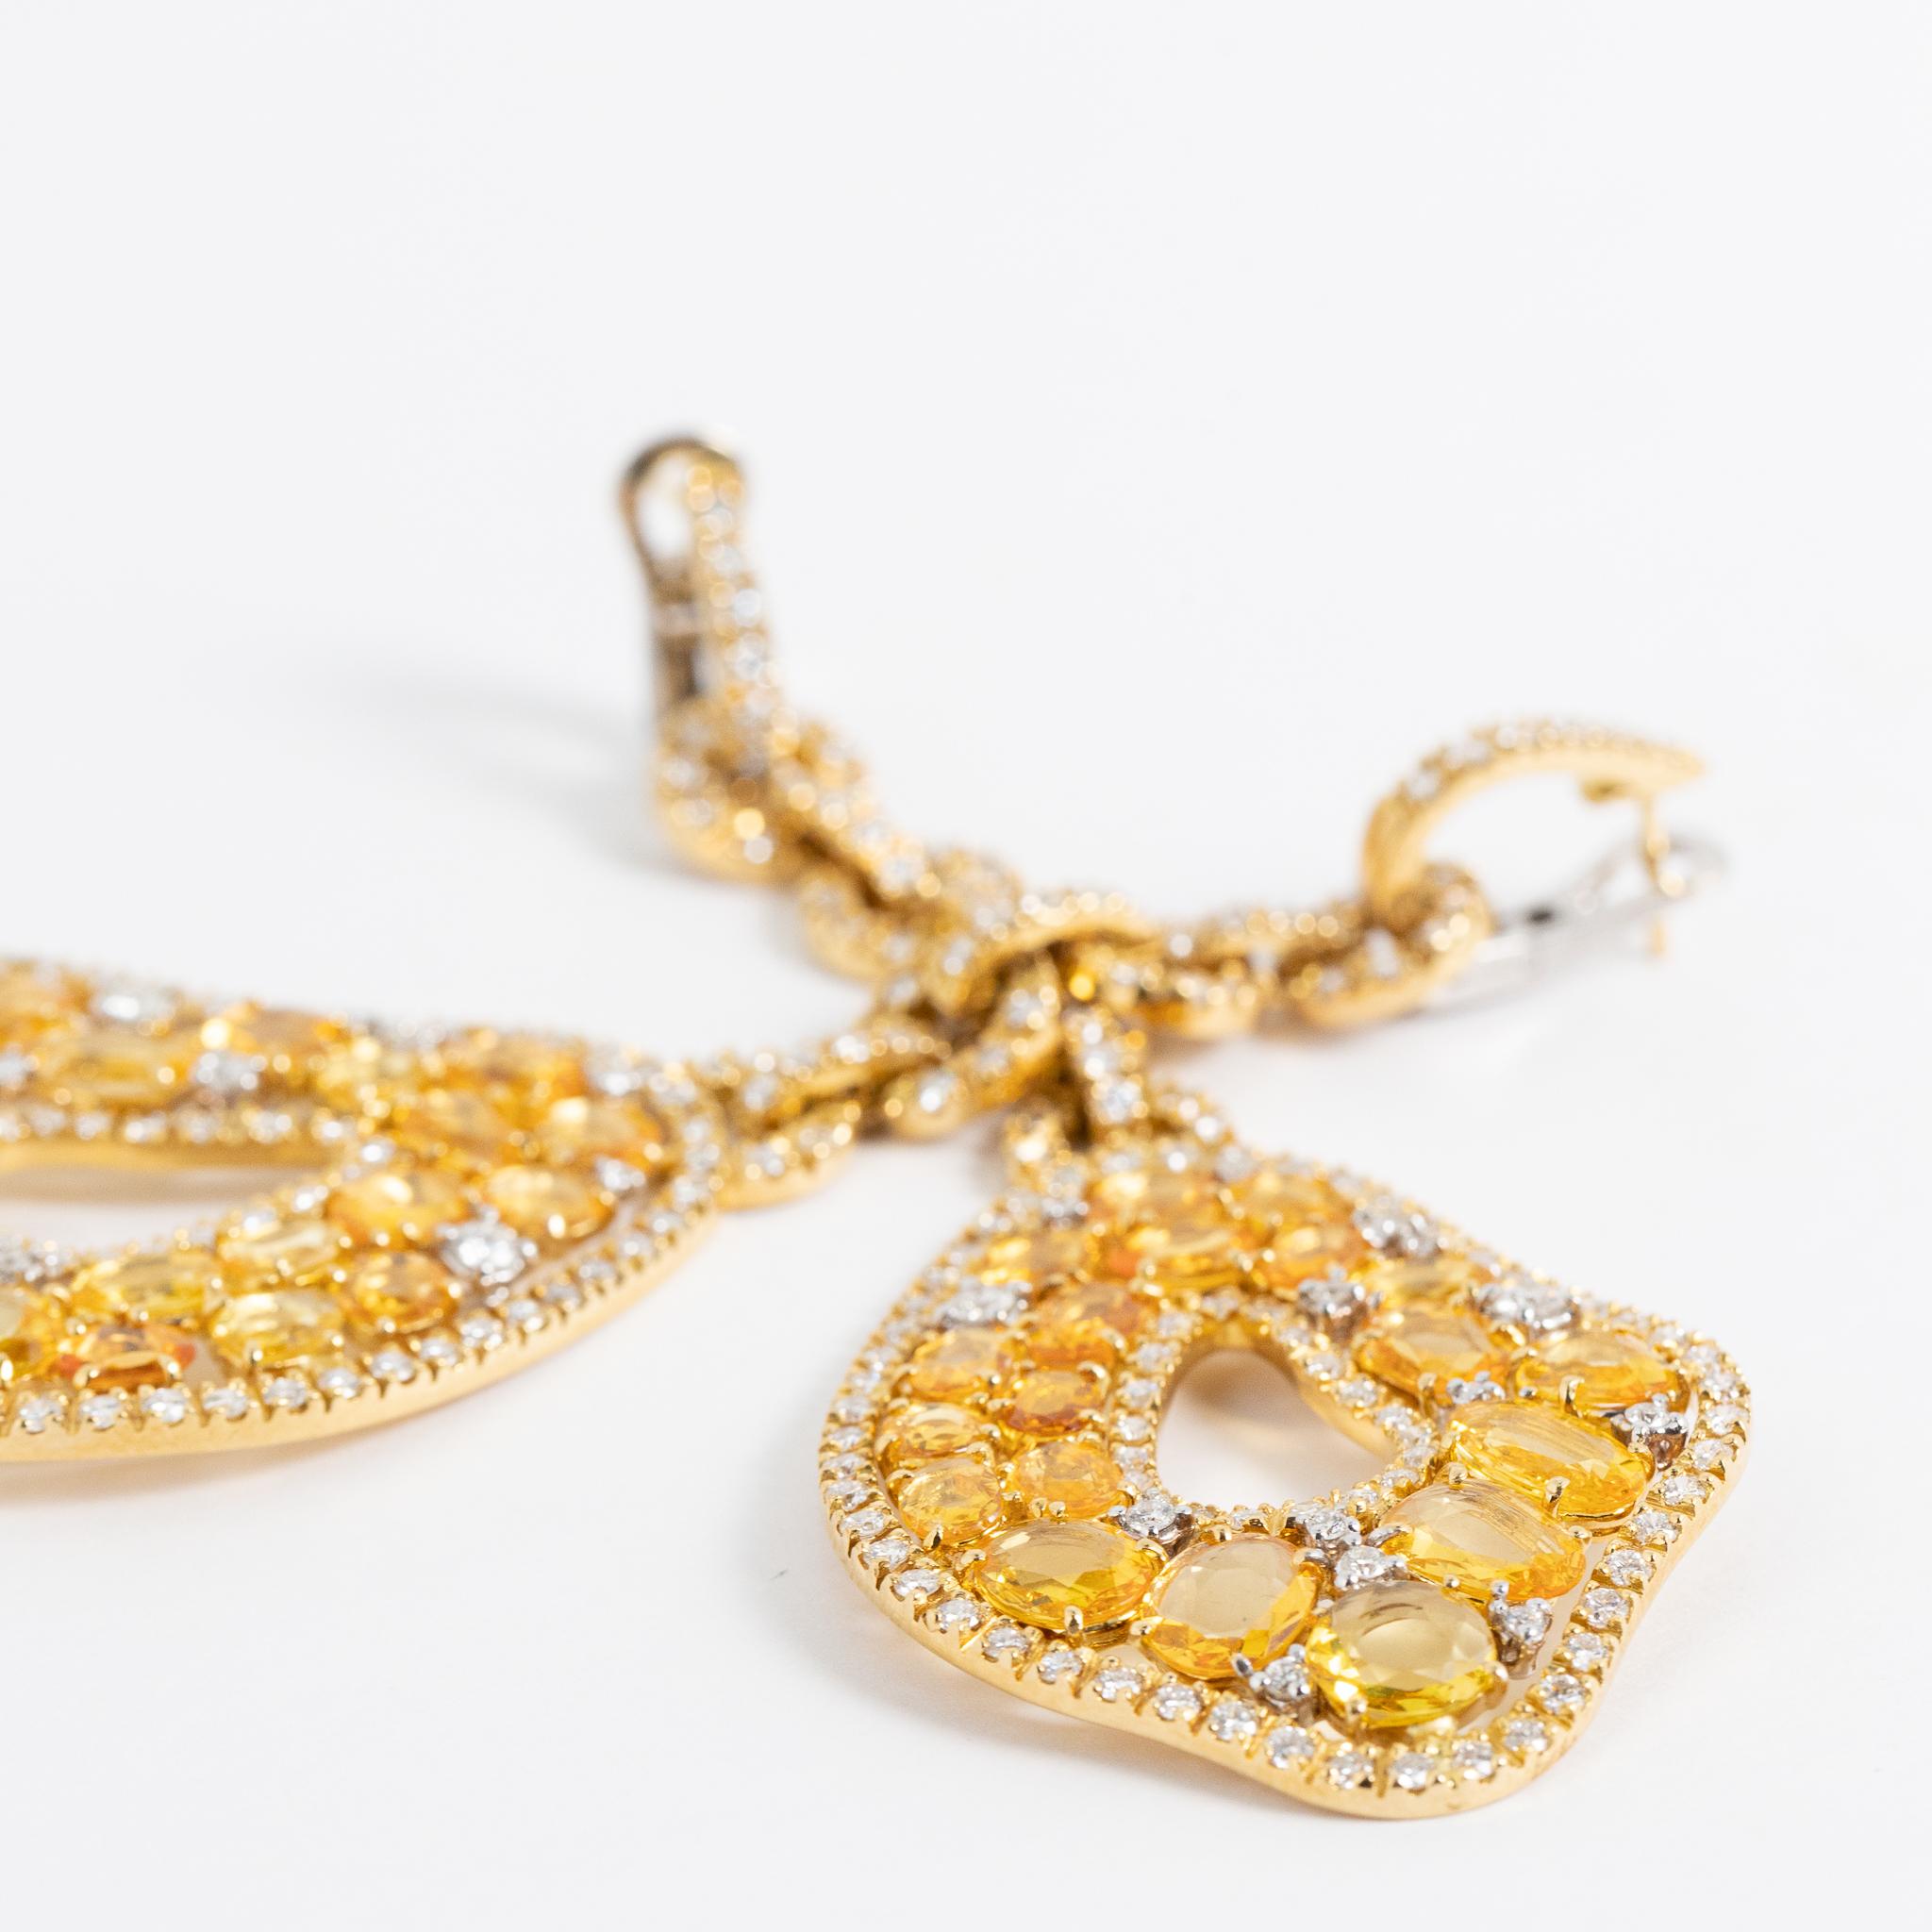 18 kt. yellow gold earrings with diamonds and yellow sapphires.
This exceptional pair of earrings is hand-made in Italy, signed by Fraleoni.
Fraleoni is a jewelry brand located in Rome, Italy.
One of a kind piece.
2010

Round cut Diamonds: 5.90 cts.